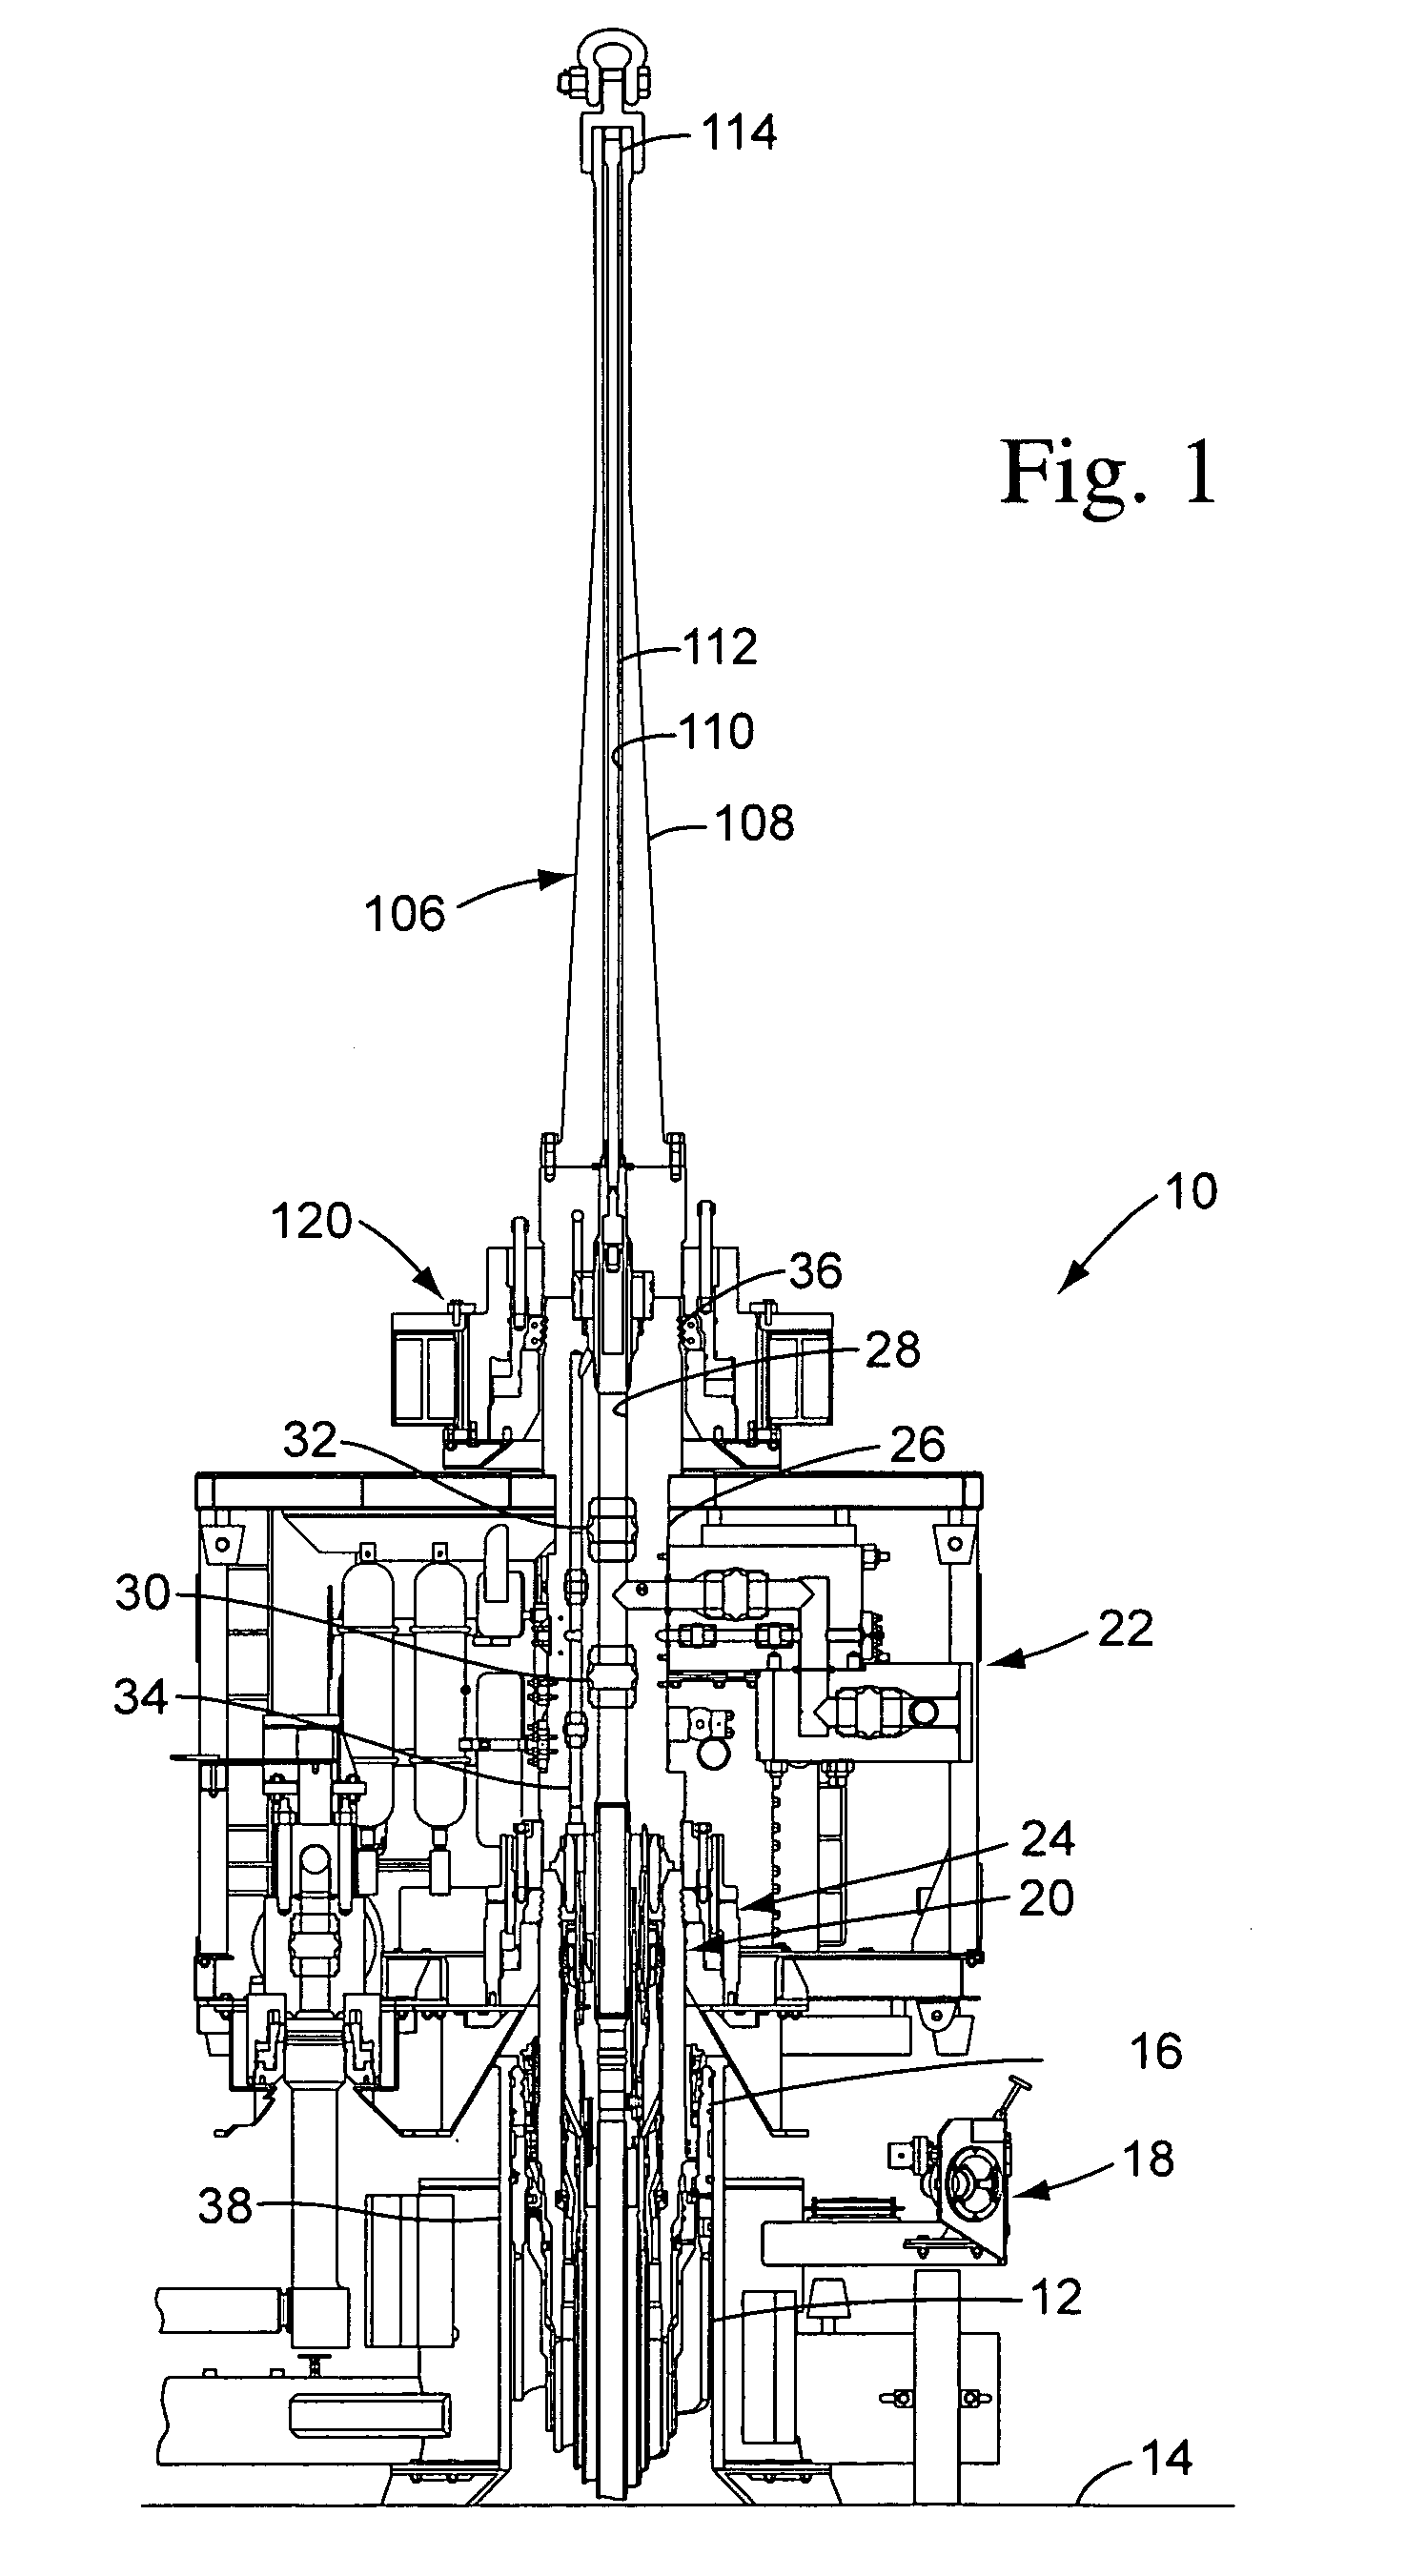 Apparatus and method for installation of subsea well completion systems